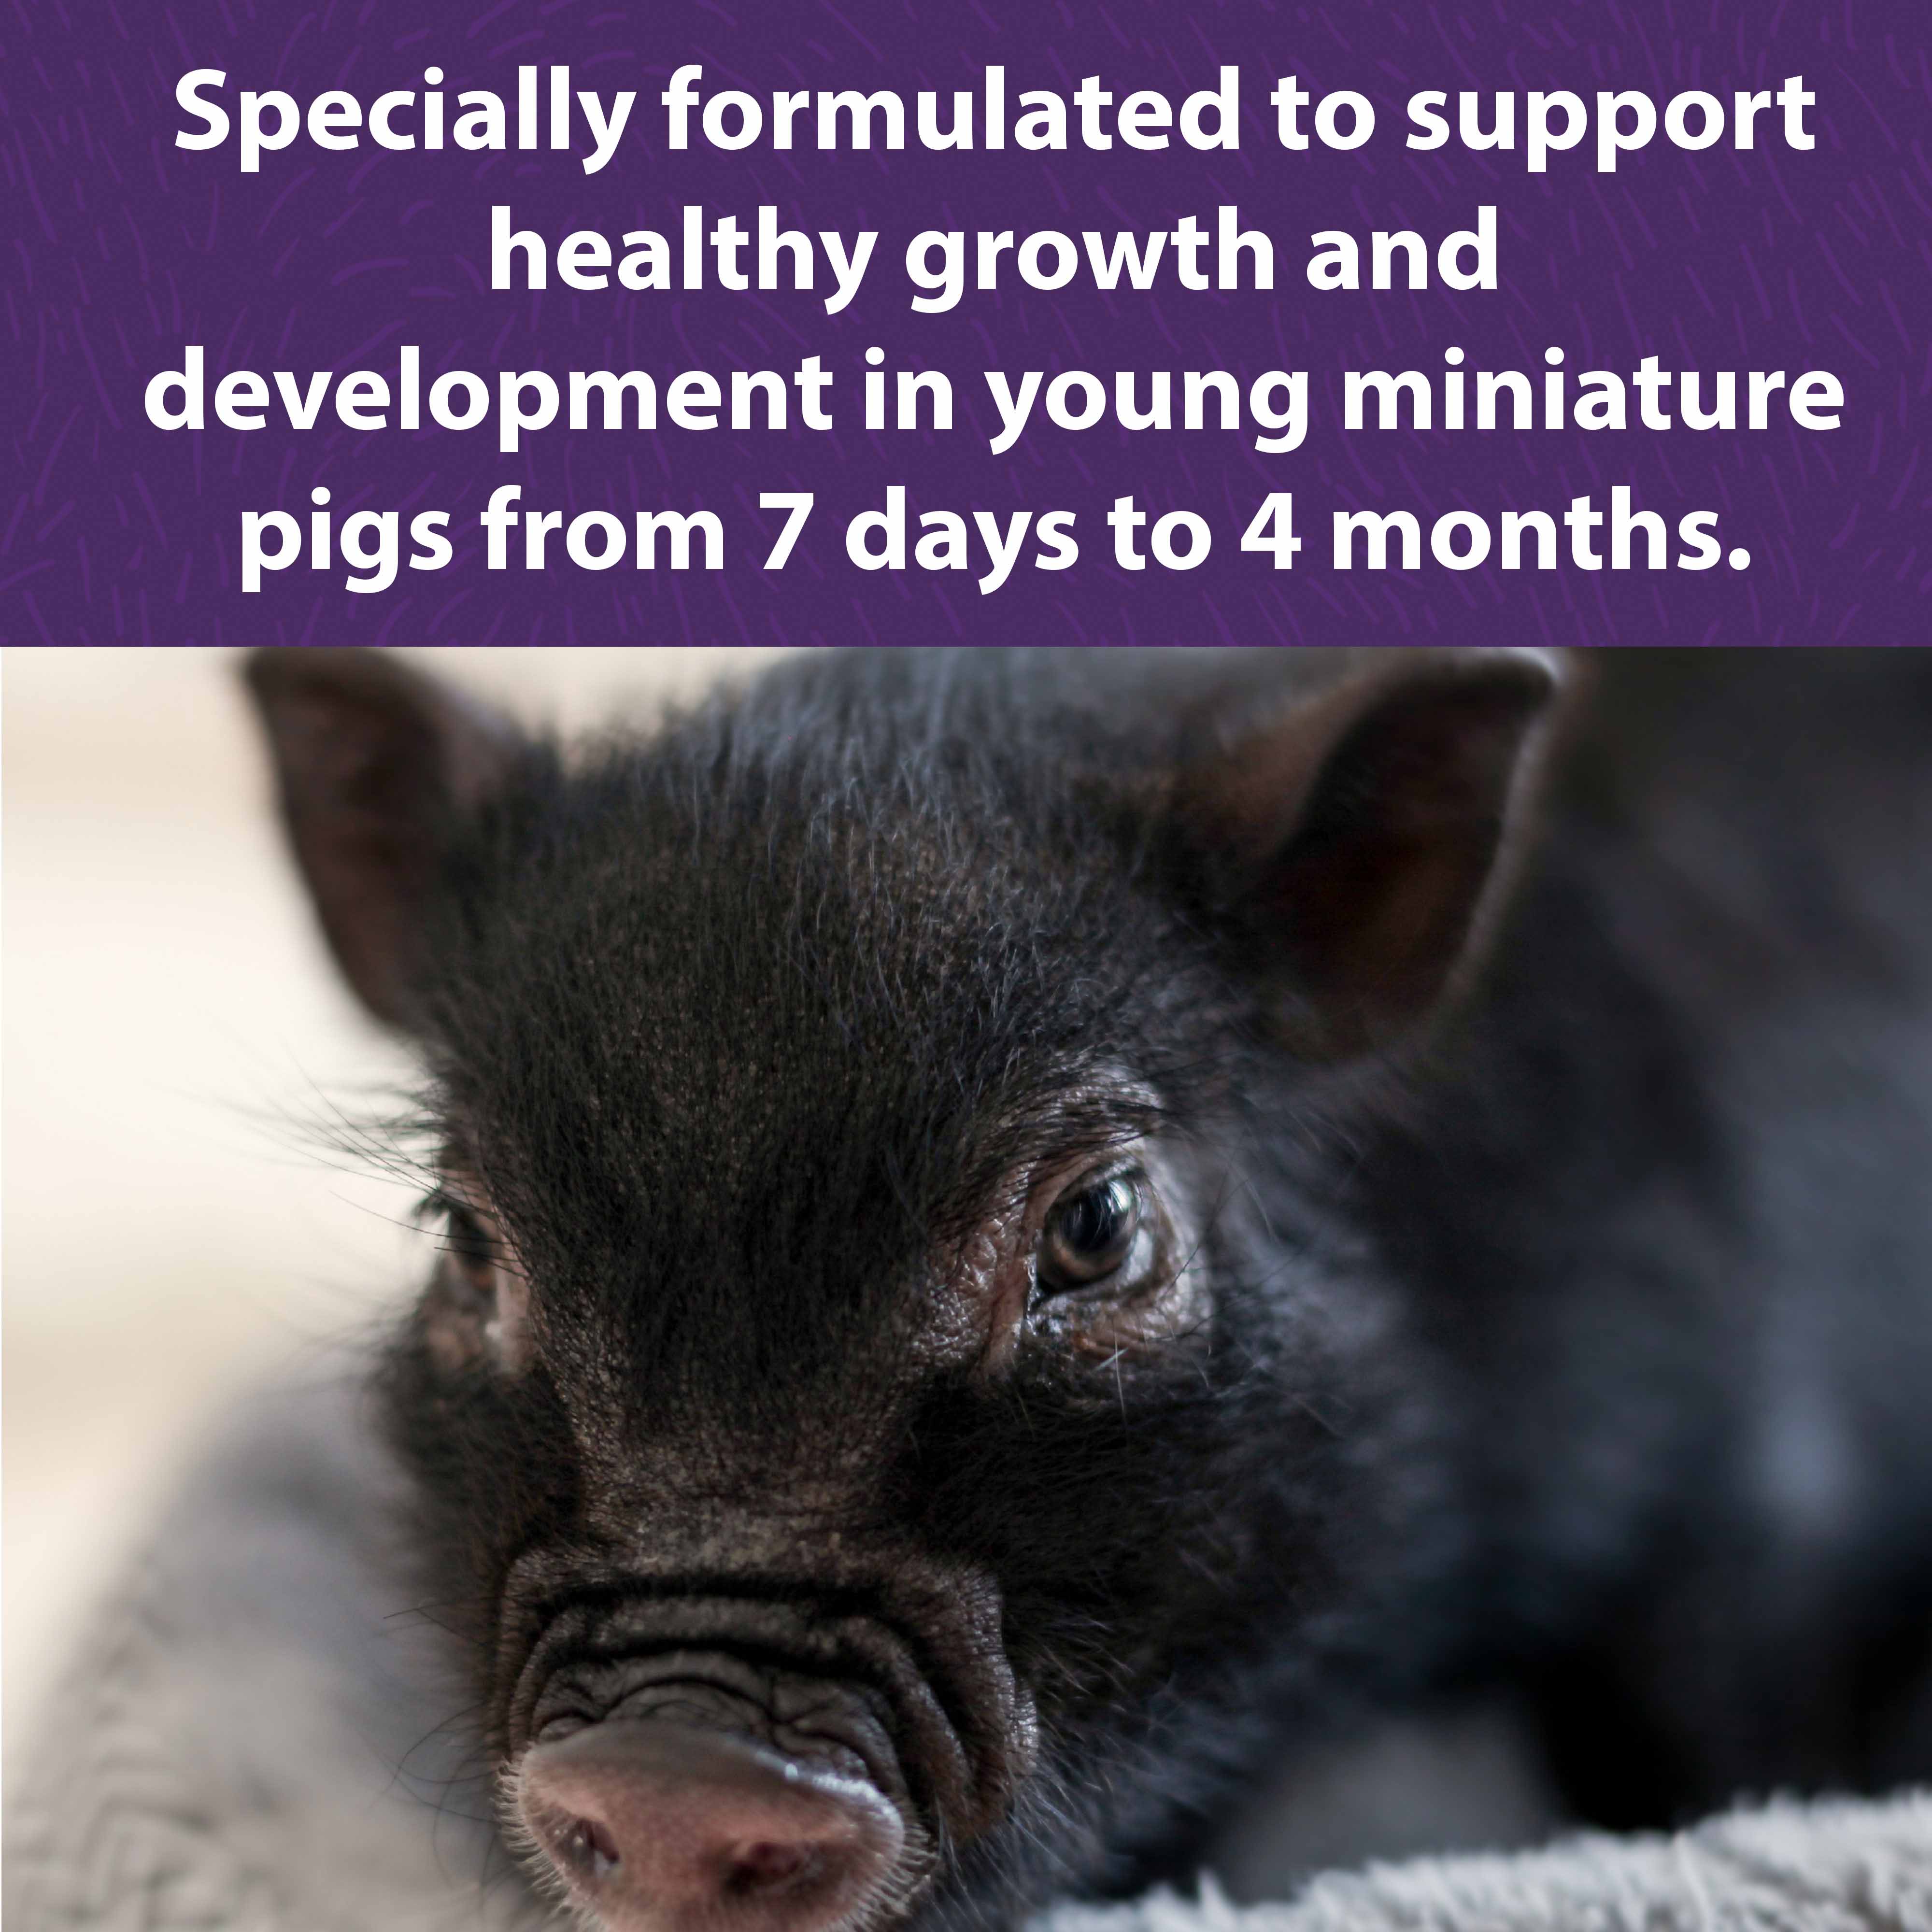 Formulated to support young mini pigs from 7 days to months.